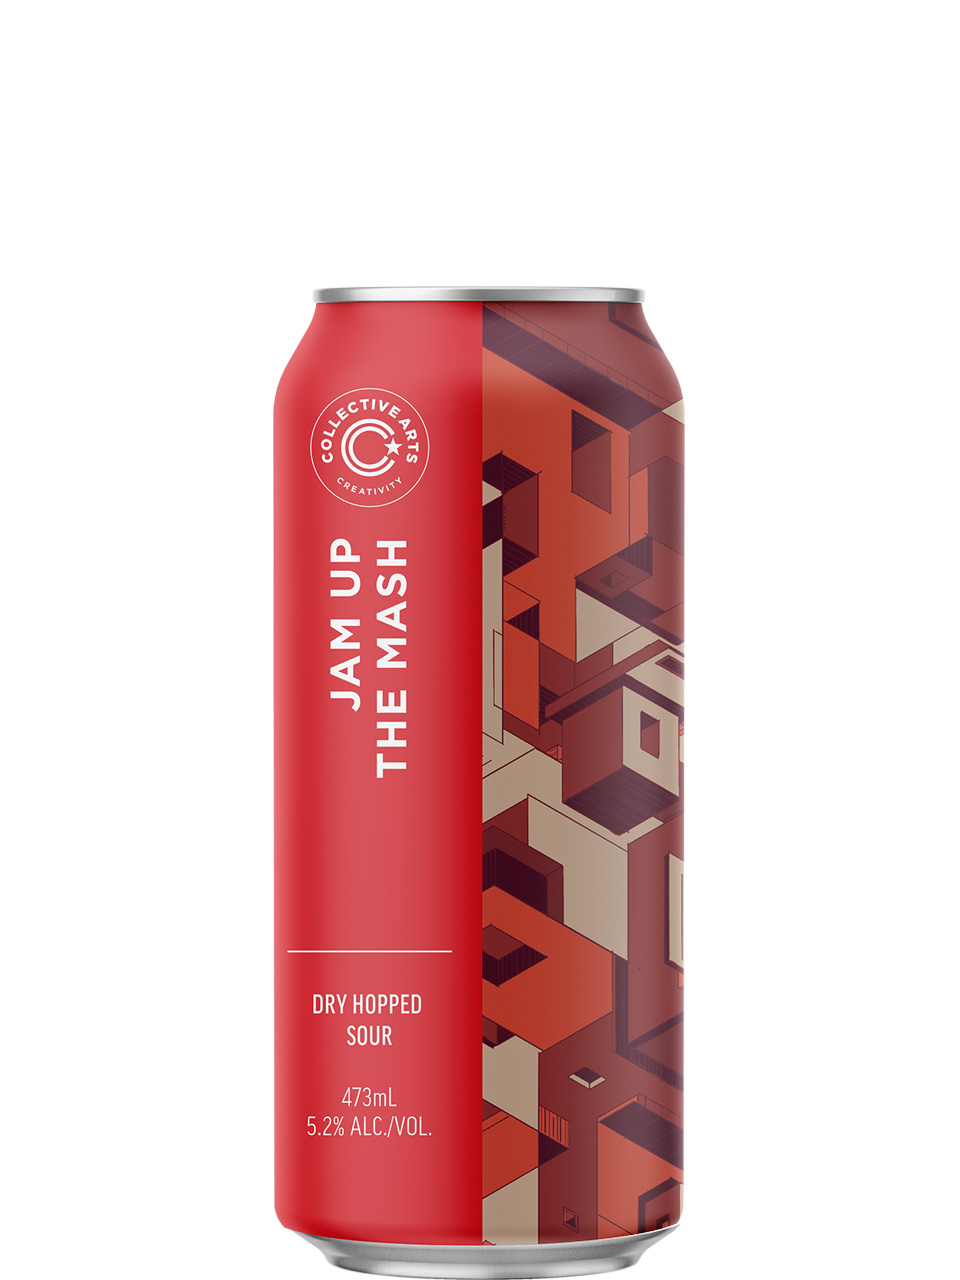 Collective Arts Mash up the Jam Hop Sour 473ml Can